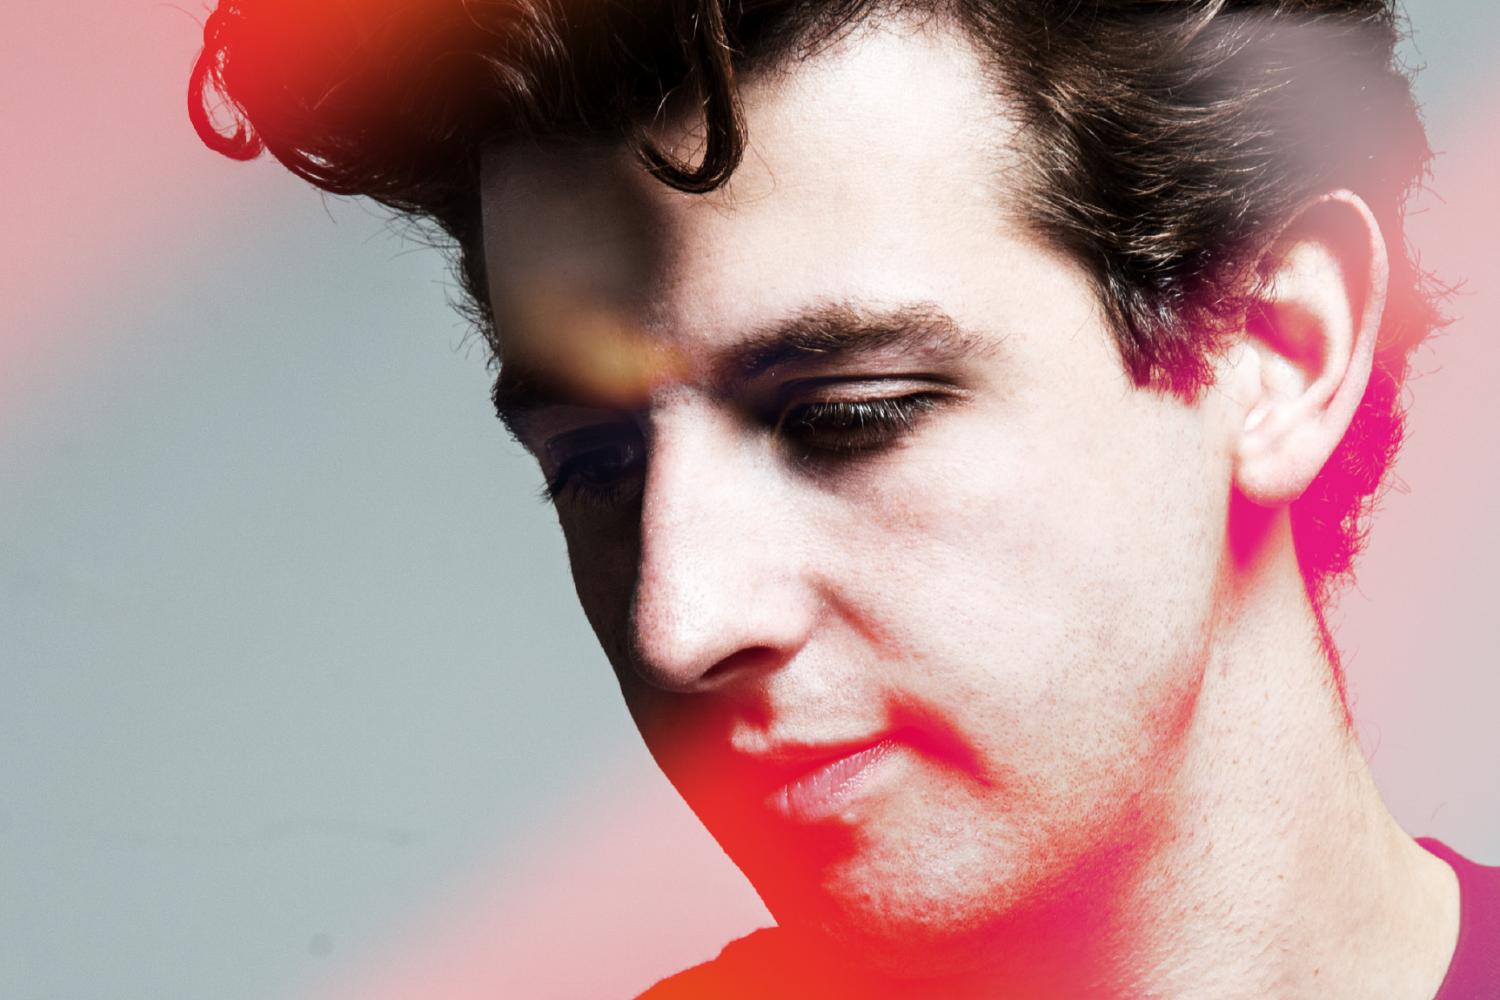 The first solo album from producer Jamie xx is a departure from his work wi...